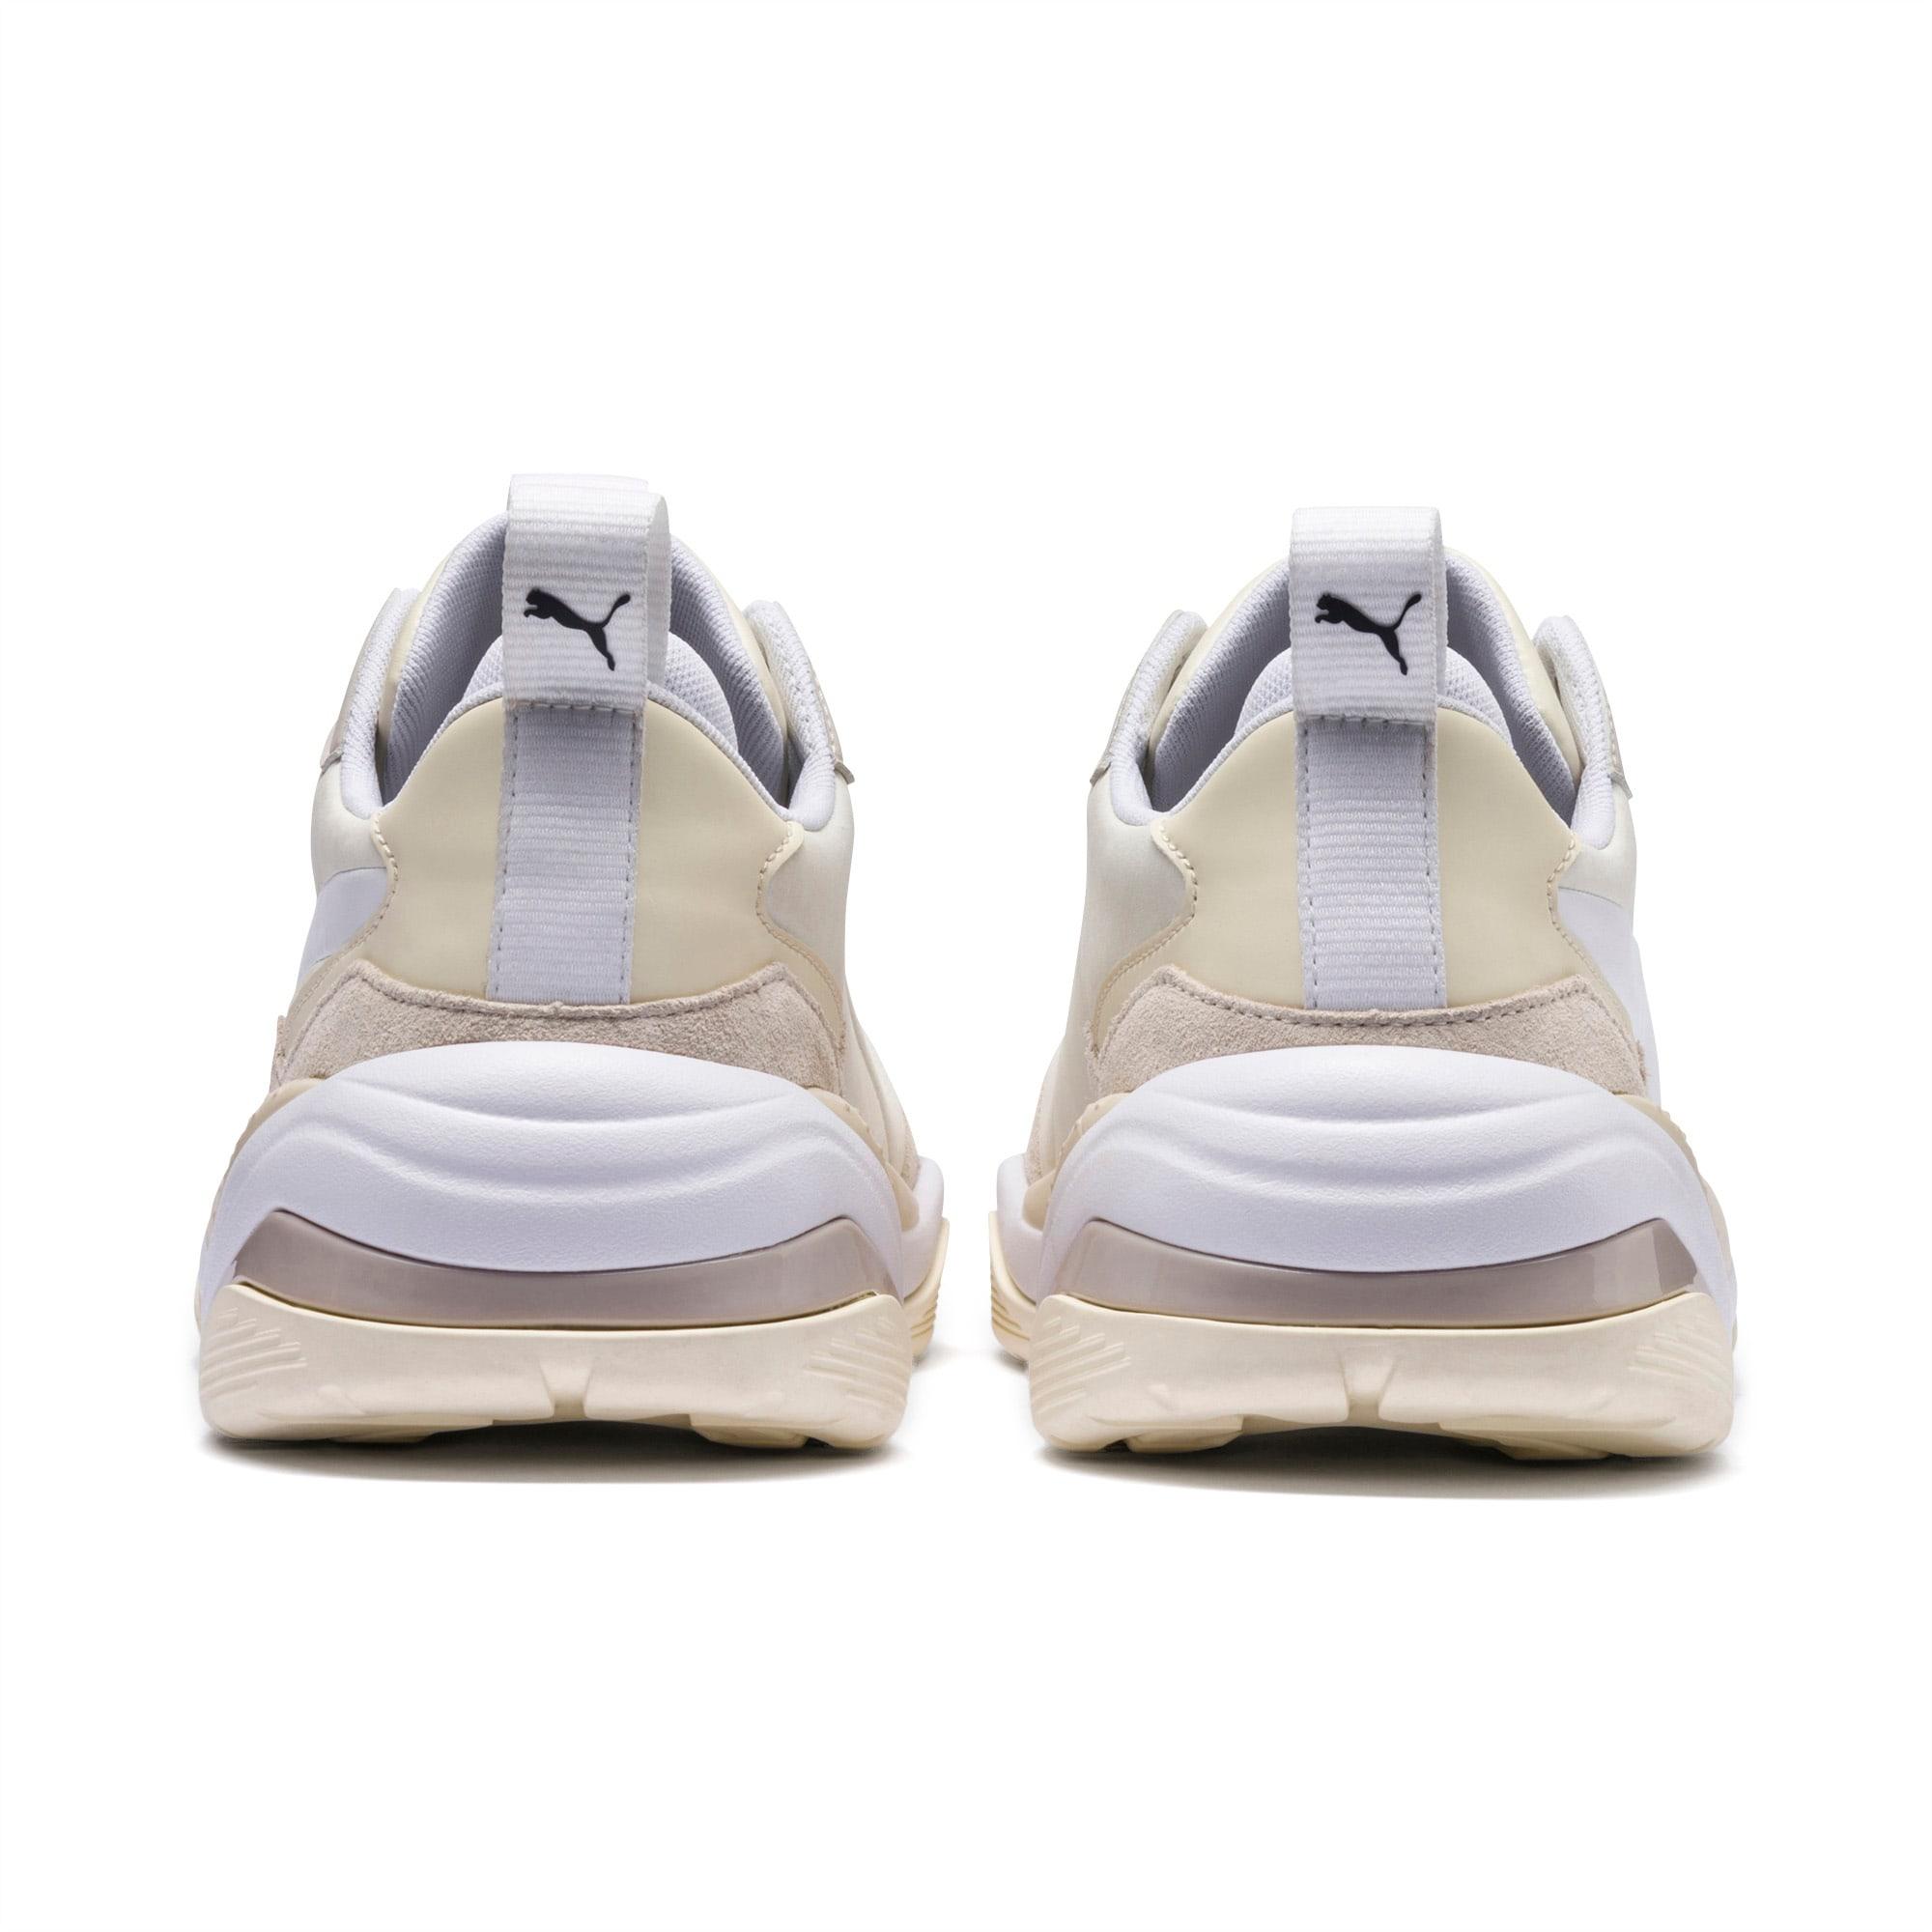 PUMA Leather Thunder Nature Sneakers in s Gray-w White-Cloud Cream (White)  - Lyst